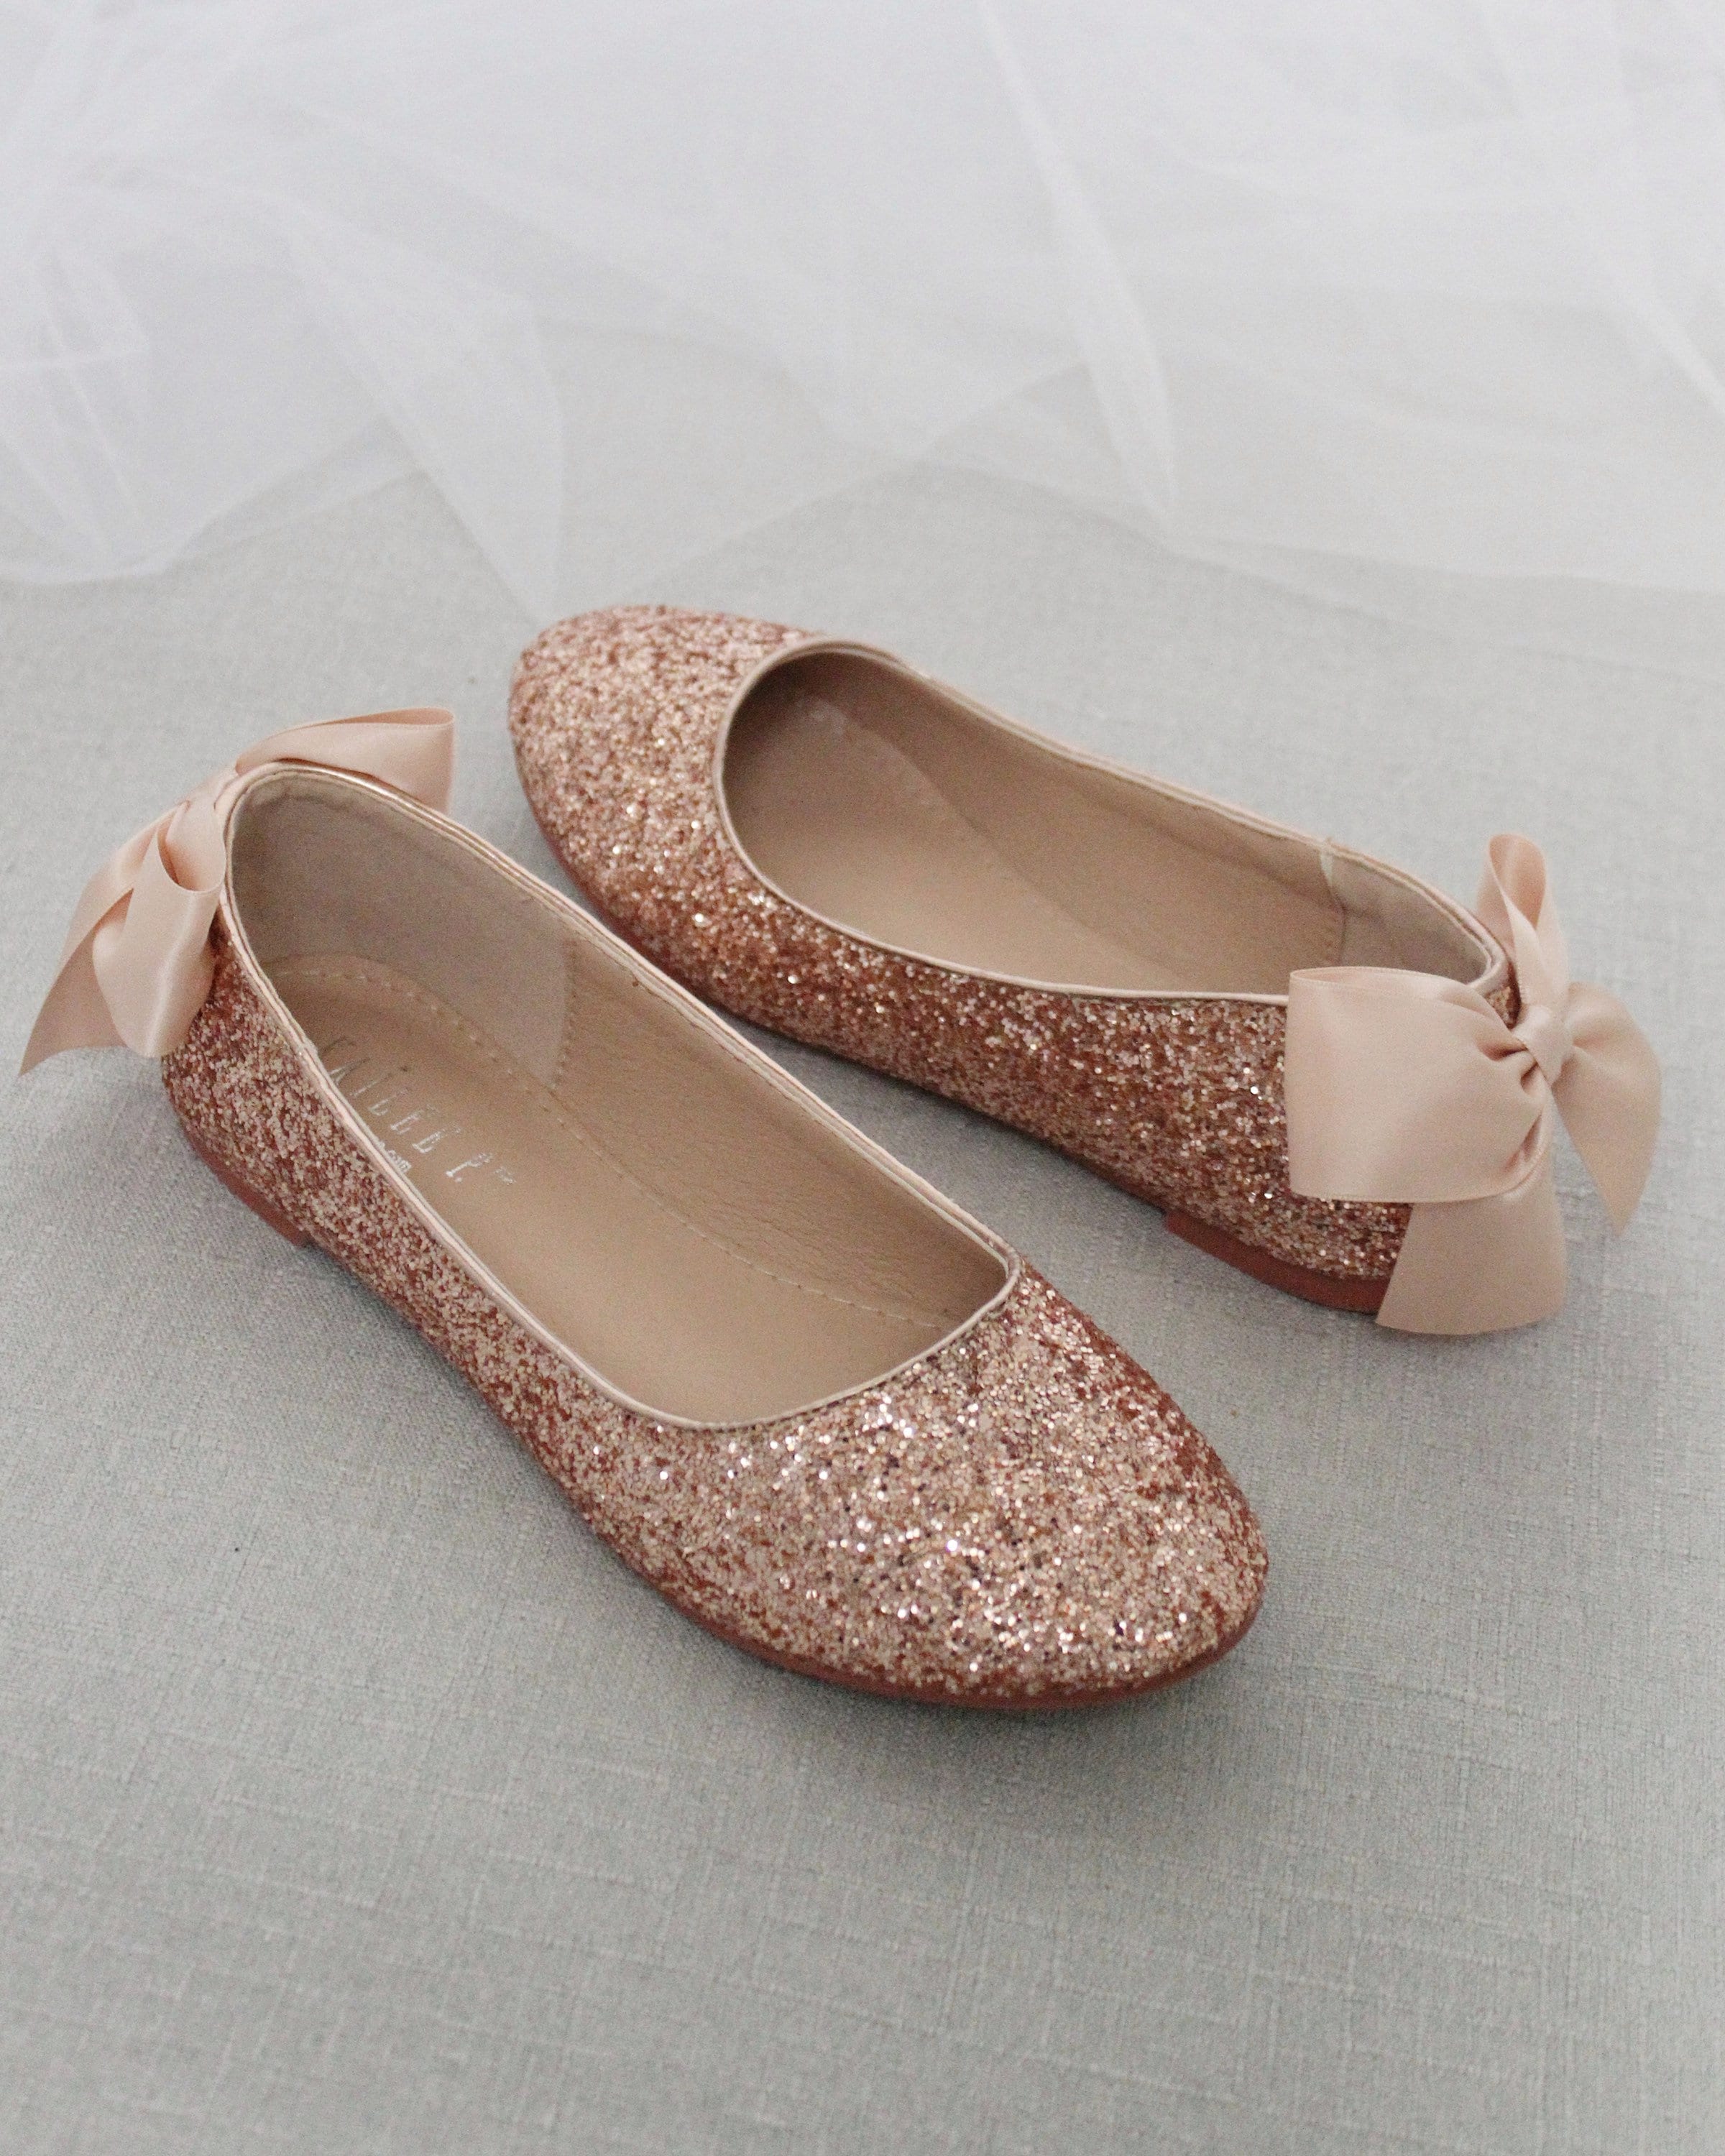 Rose Gold Rock Glitter Flats with Back Satin Bow - Fall Wedding Shoes, Bridesmaids Shoes, Women Wedding Flats, Holiday Shoes